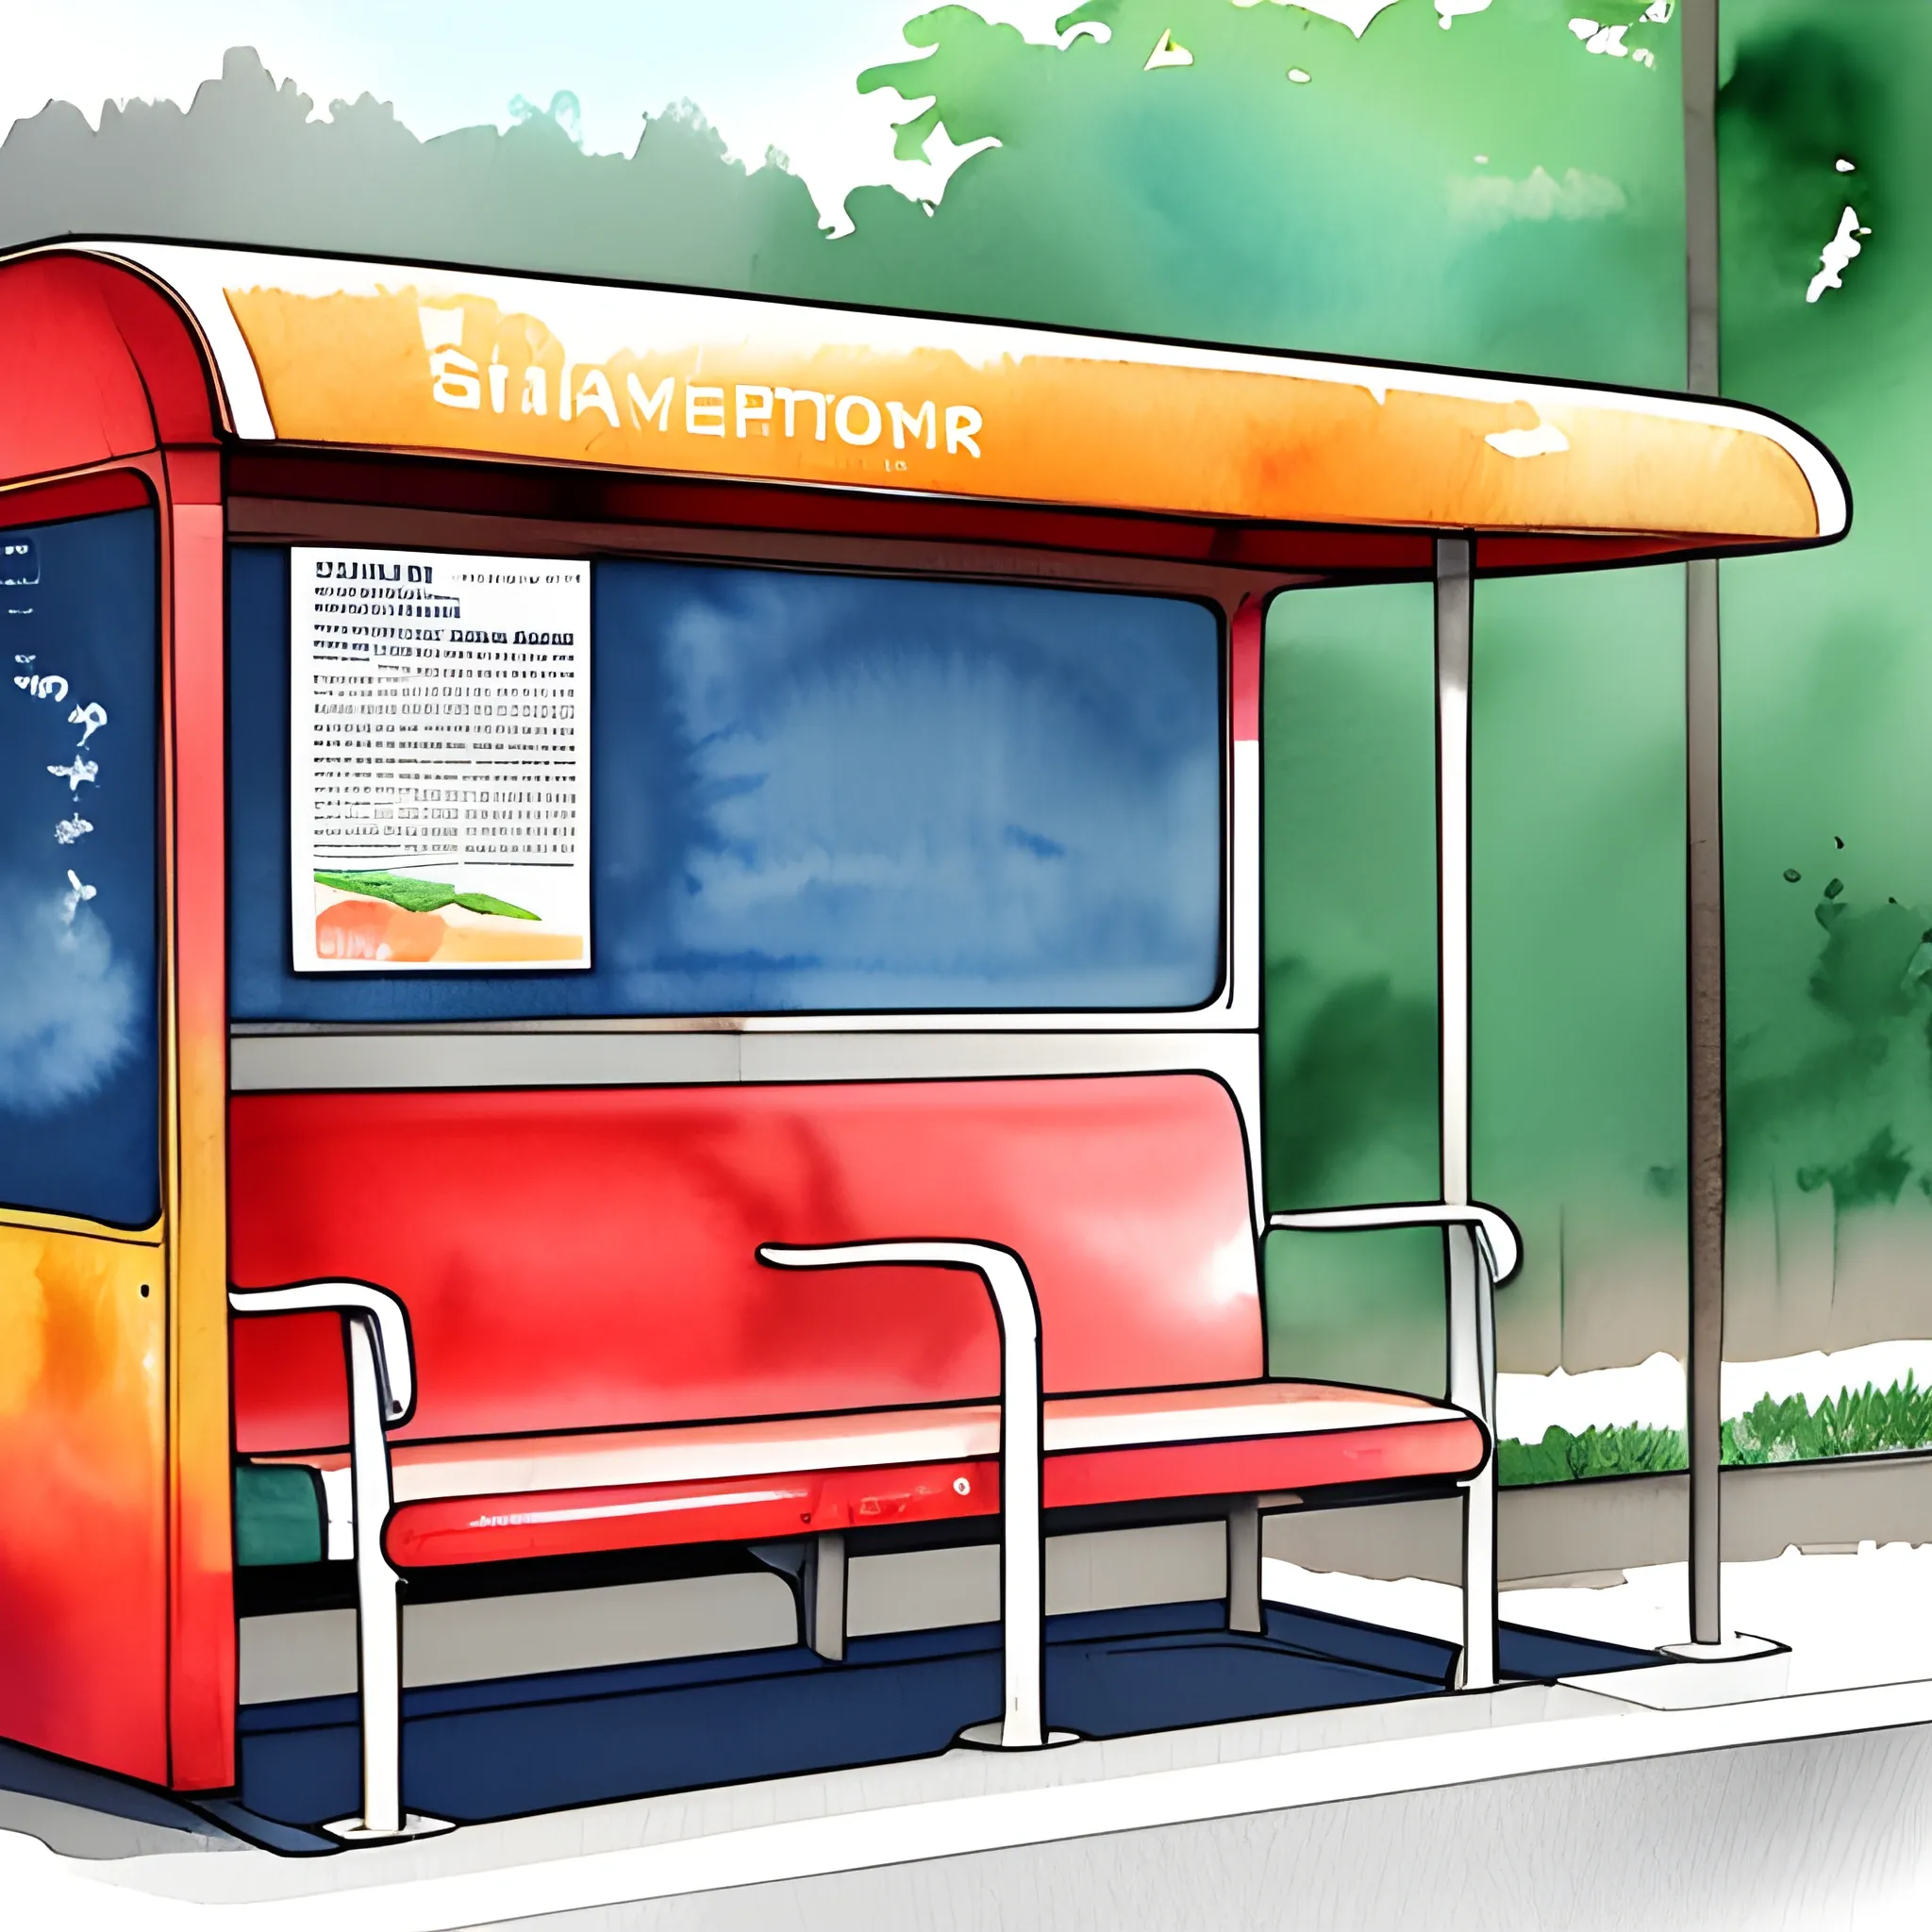 Create a watercolor illustration showcasing the seat of a bus stop, excluding any individuals